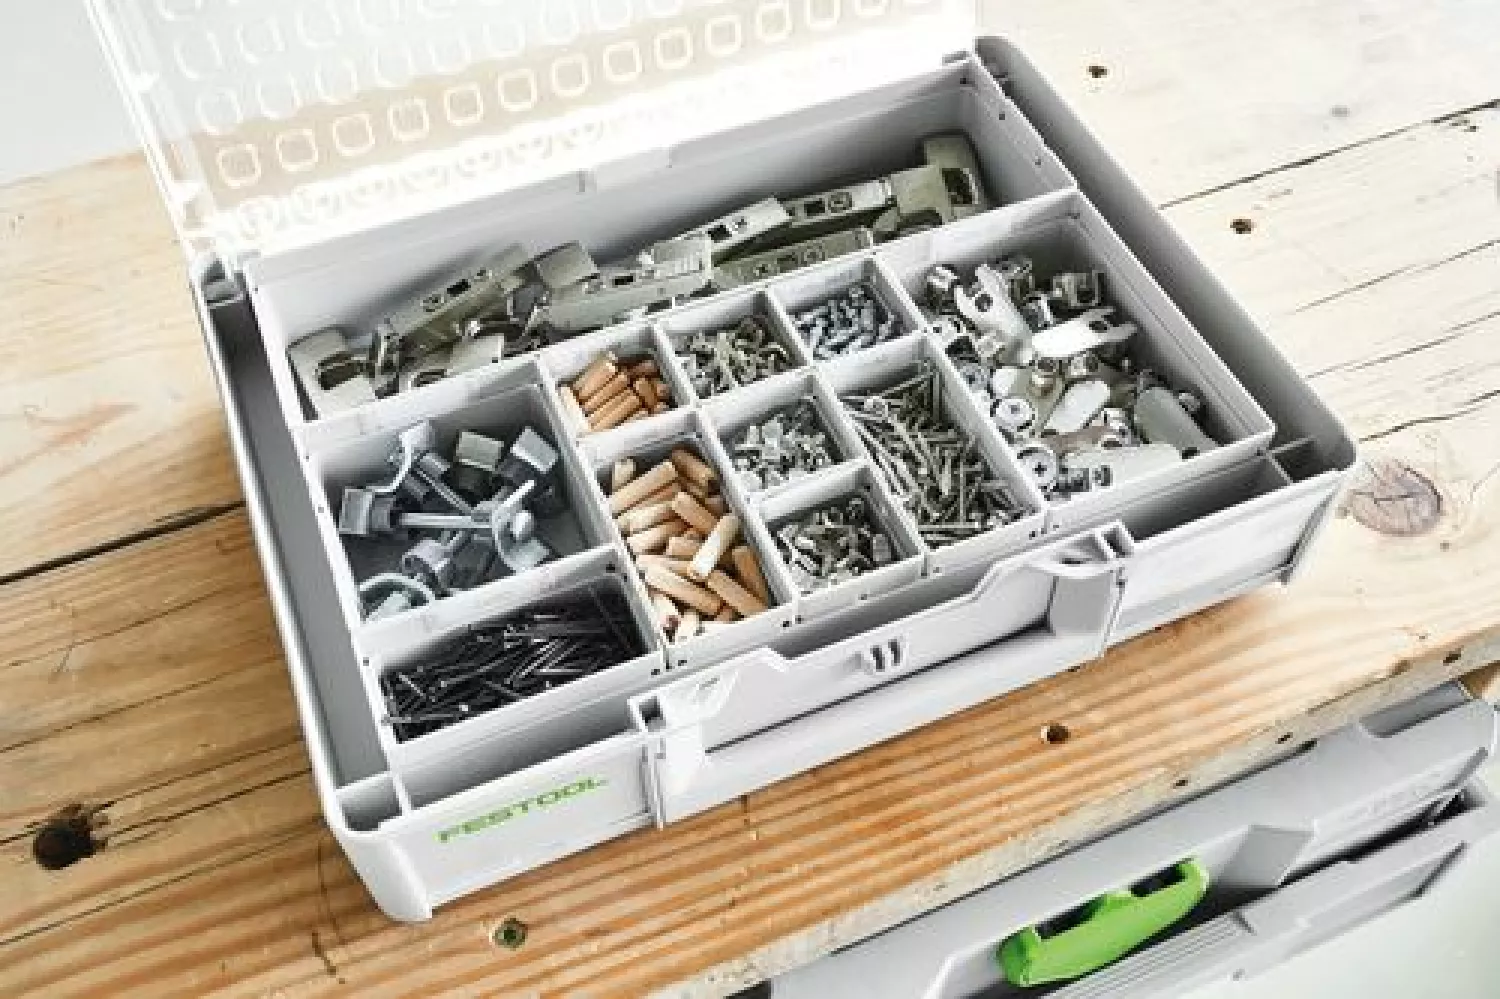 Festool SYS3 ORG L 89 10xESB Systainer³ Organizer - 9,7L-image